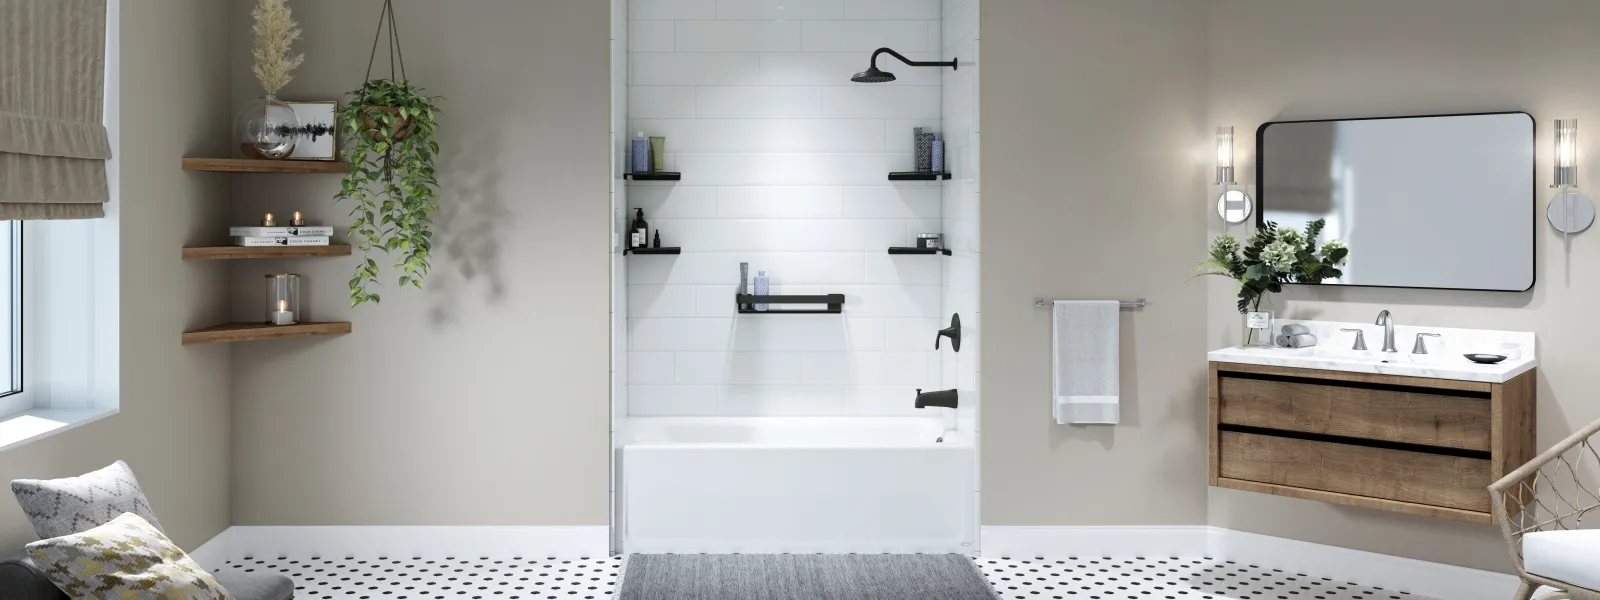 Converting a Bathtub to a Shower: How It Works